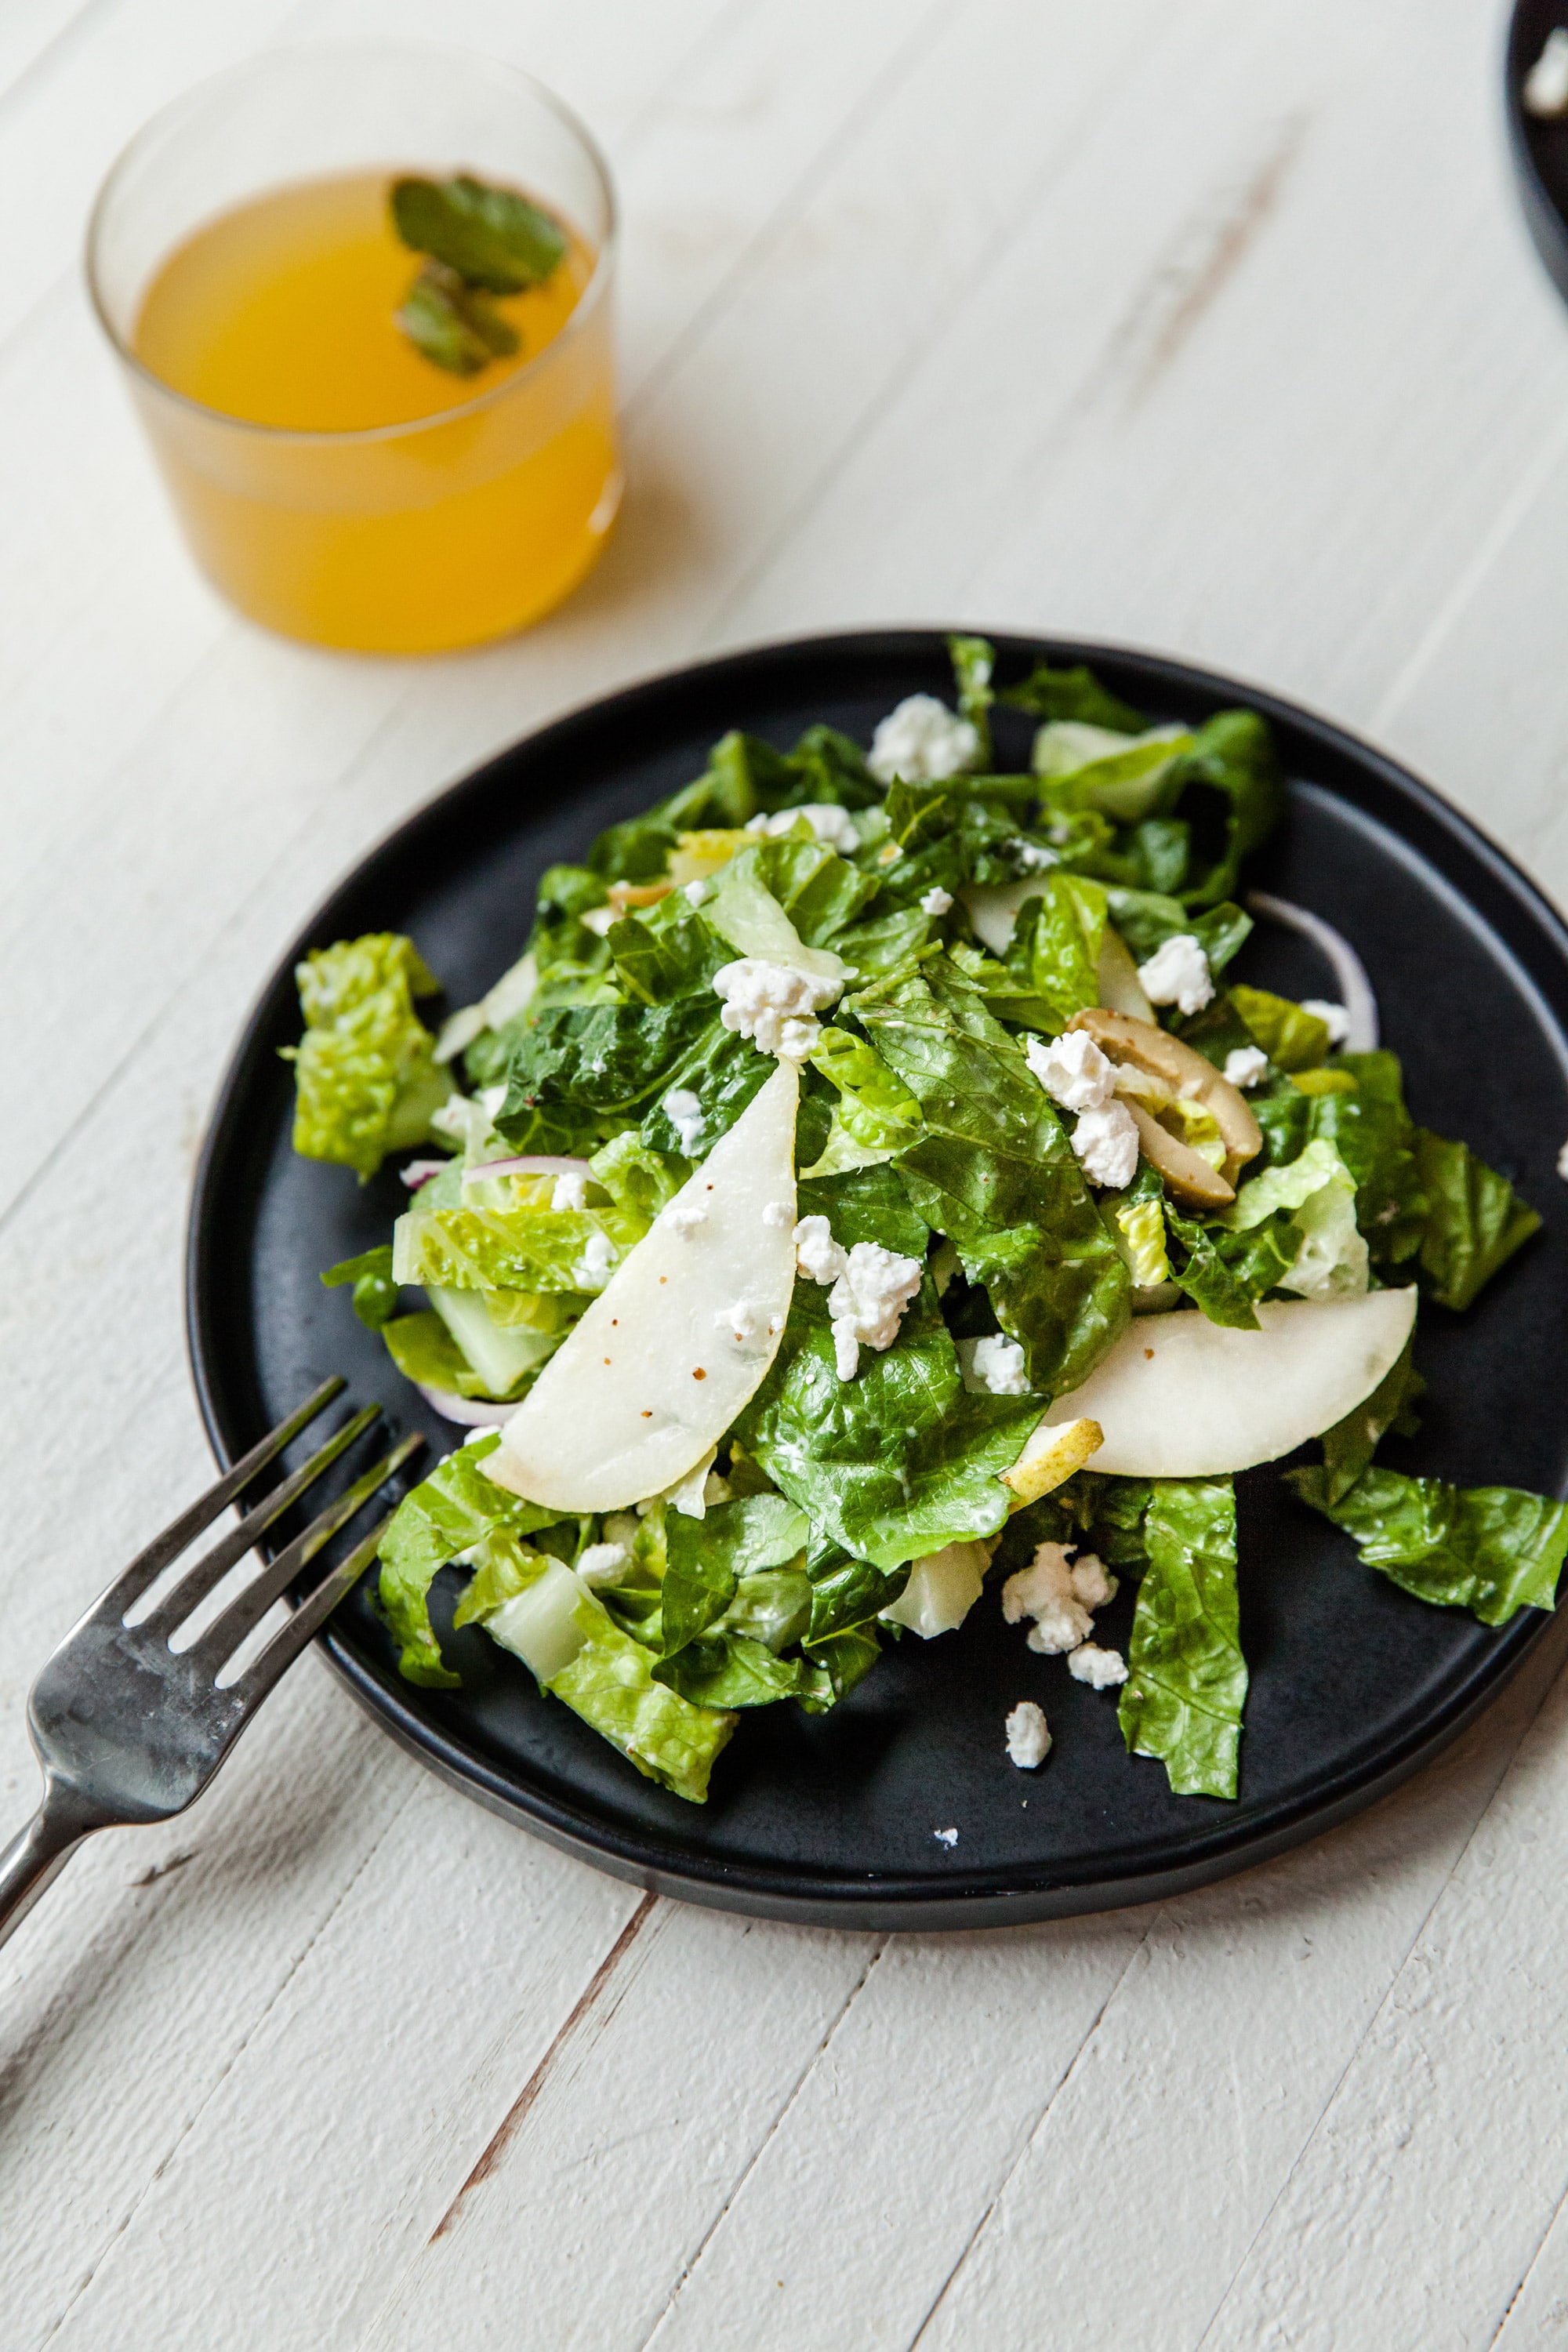 Romaine, Pear and Goat Cheese Salad / Photo by Carrie Crow / Katie Workman / themom100.com